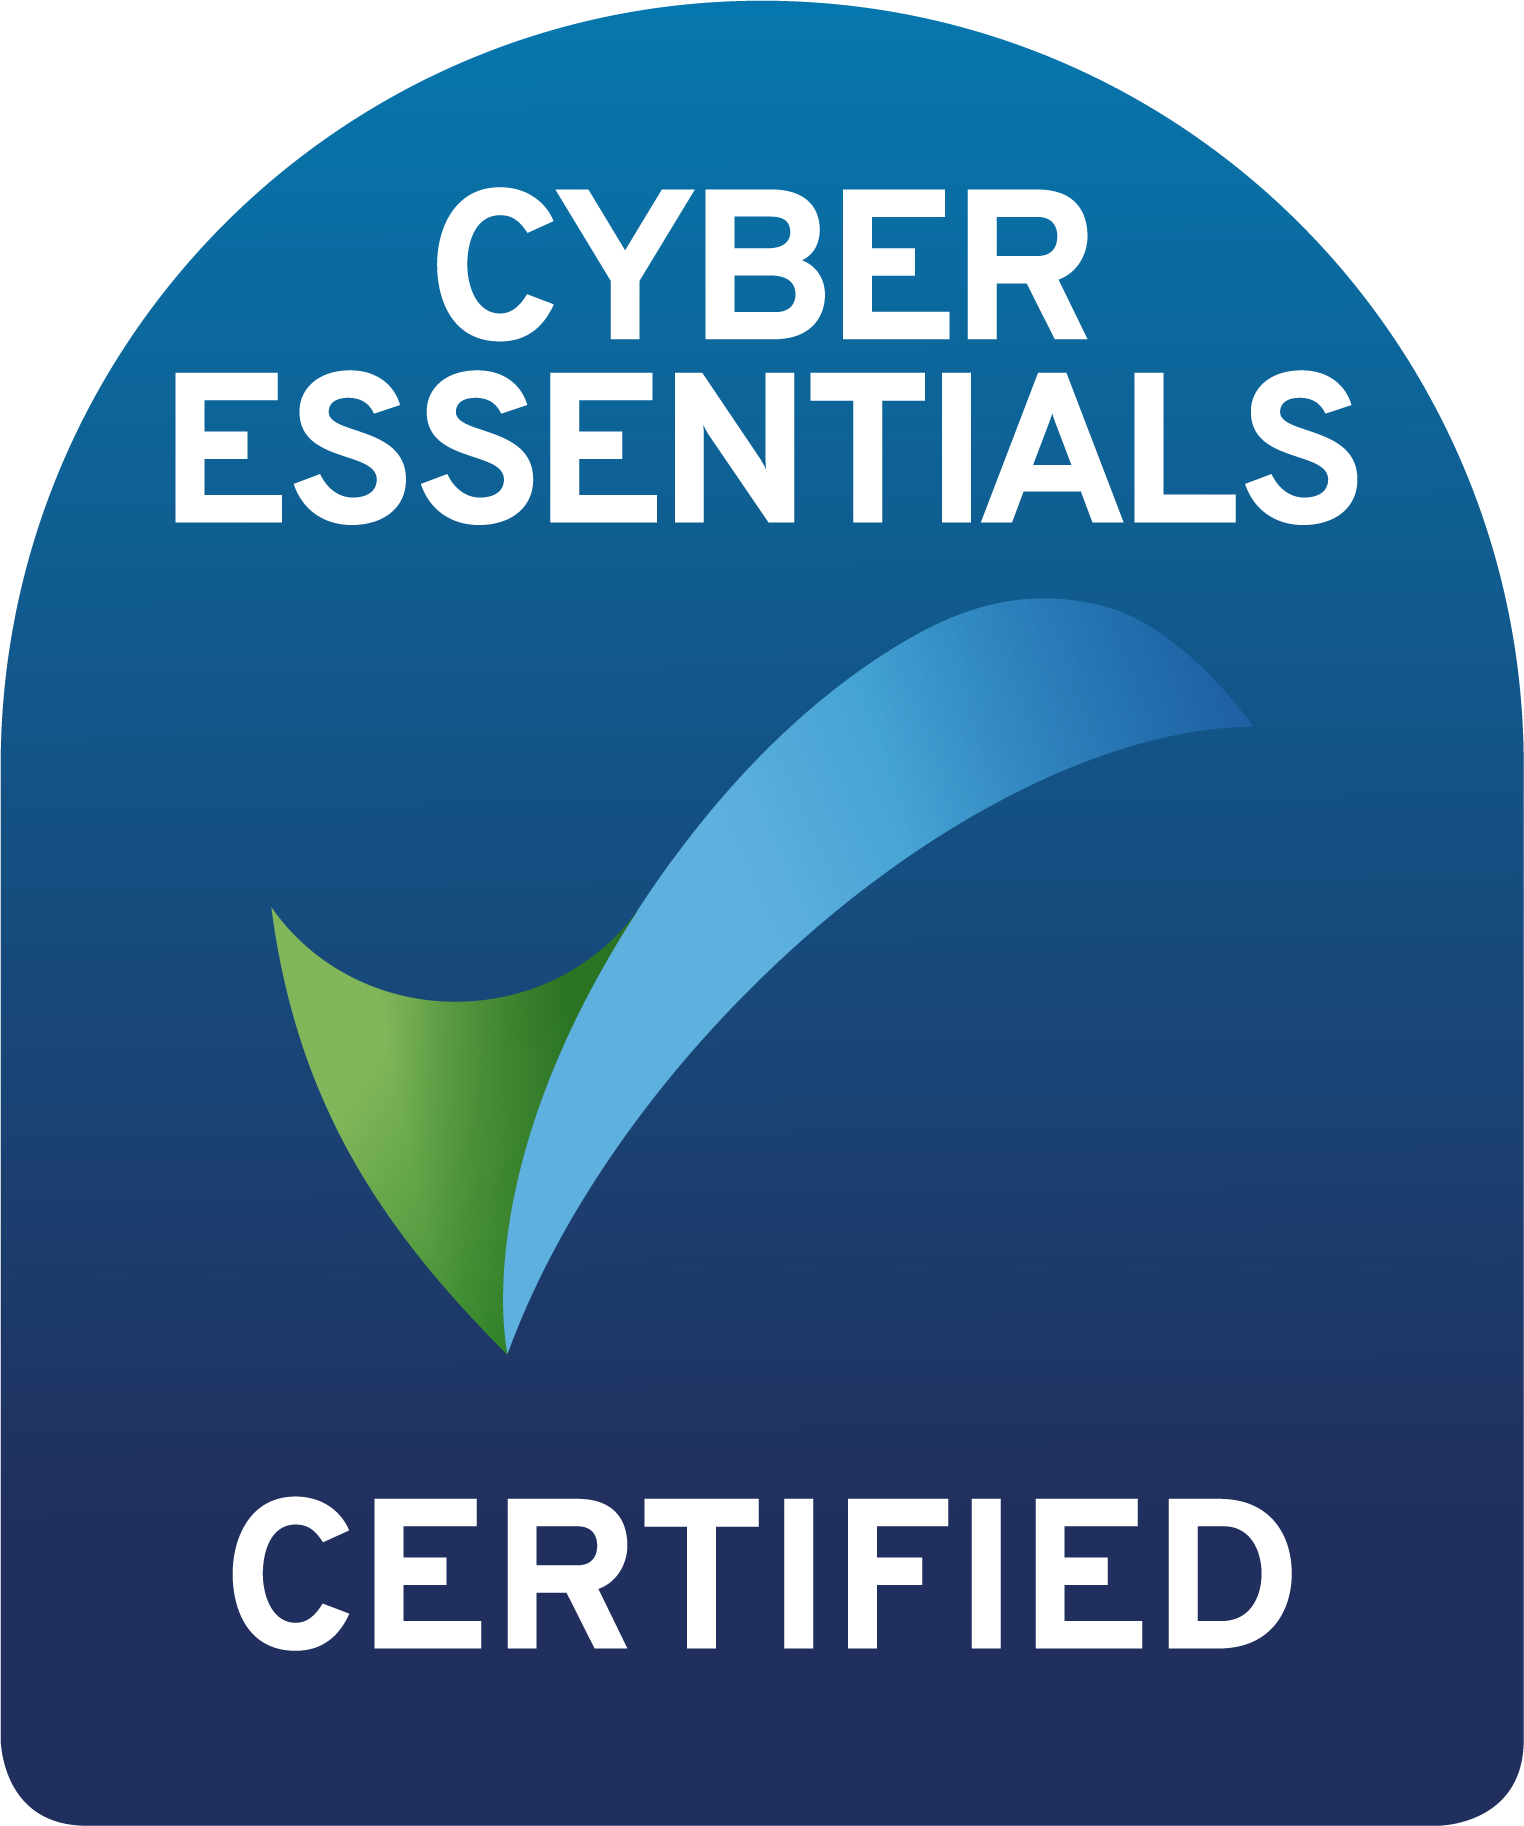 Cyber Essentials Certified Company in Bolton